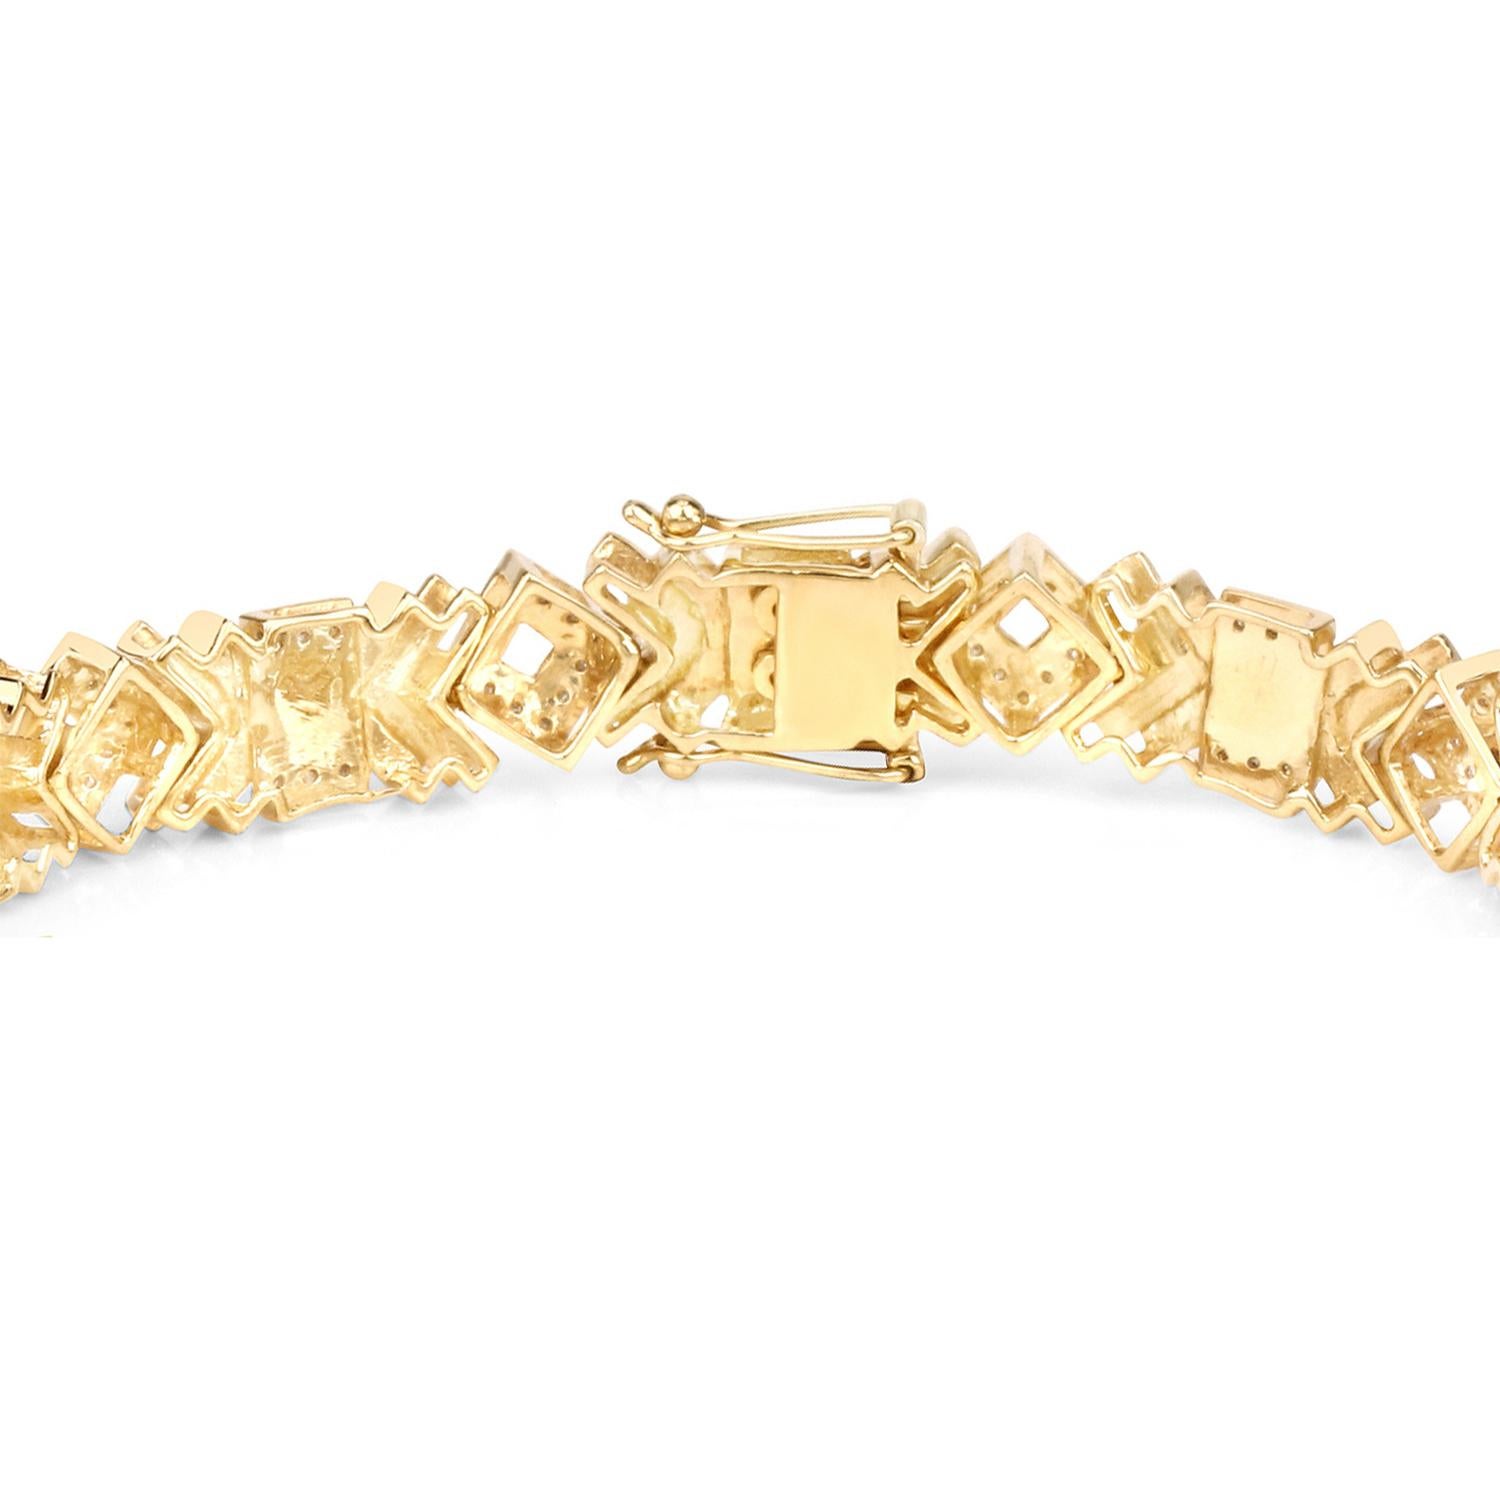 Diamond Cocktail Bracelet 14K Yellow Gold Plated Sterling Silver 9 Inches In Excellent Condition For Sale In Laguna Niguel, CA